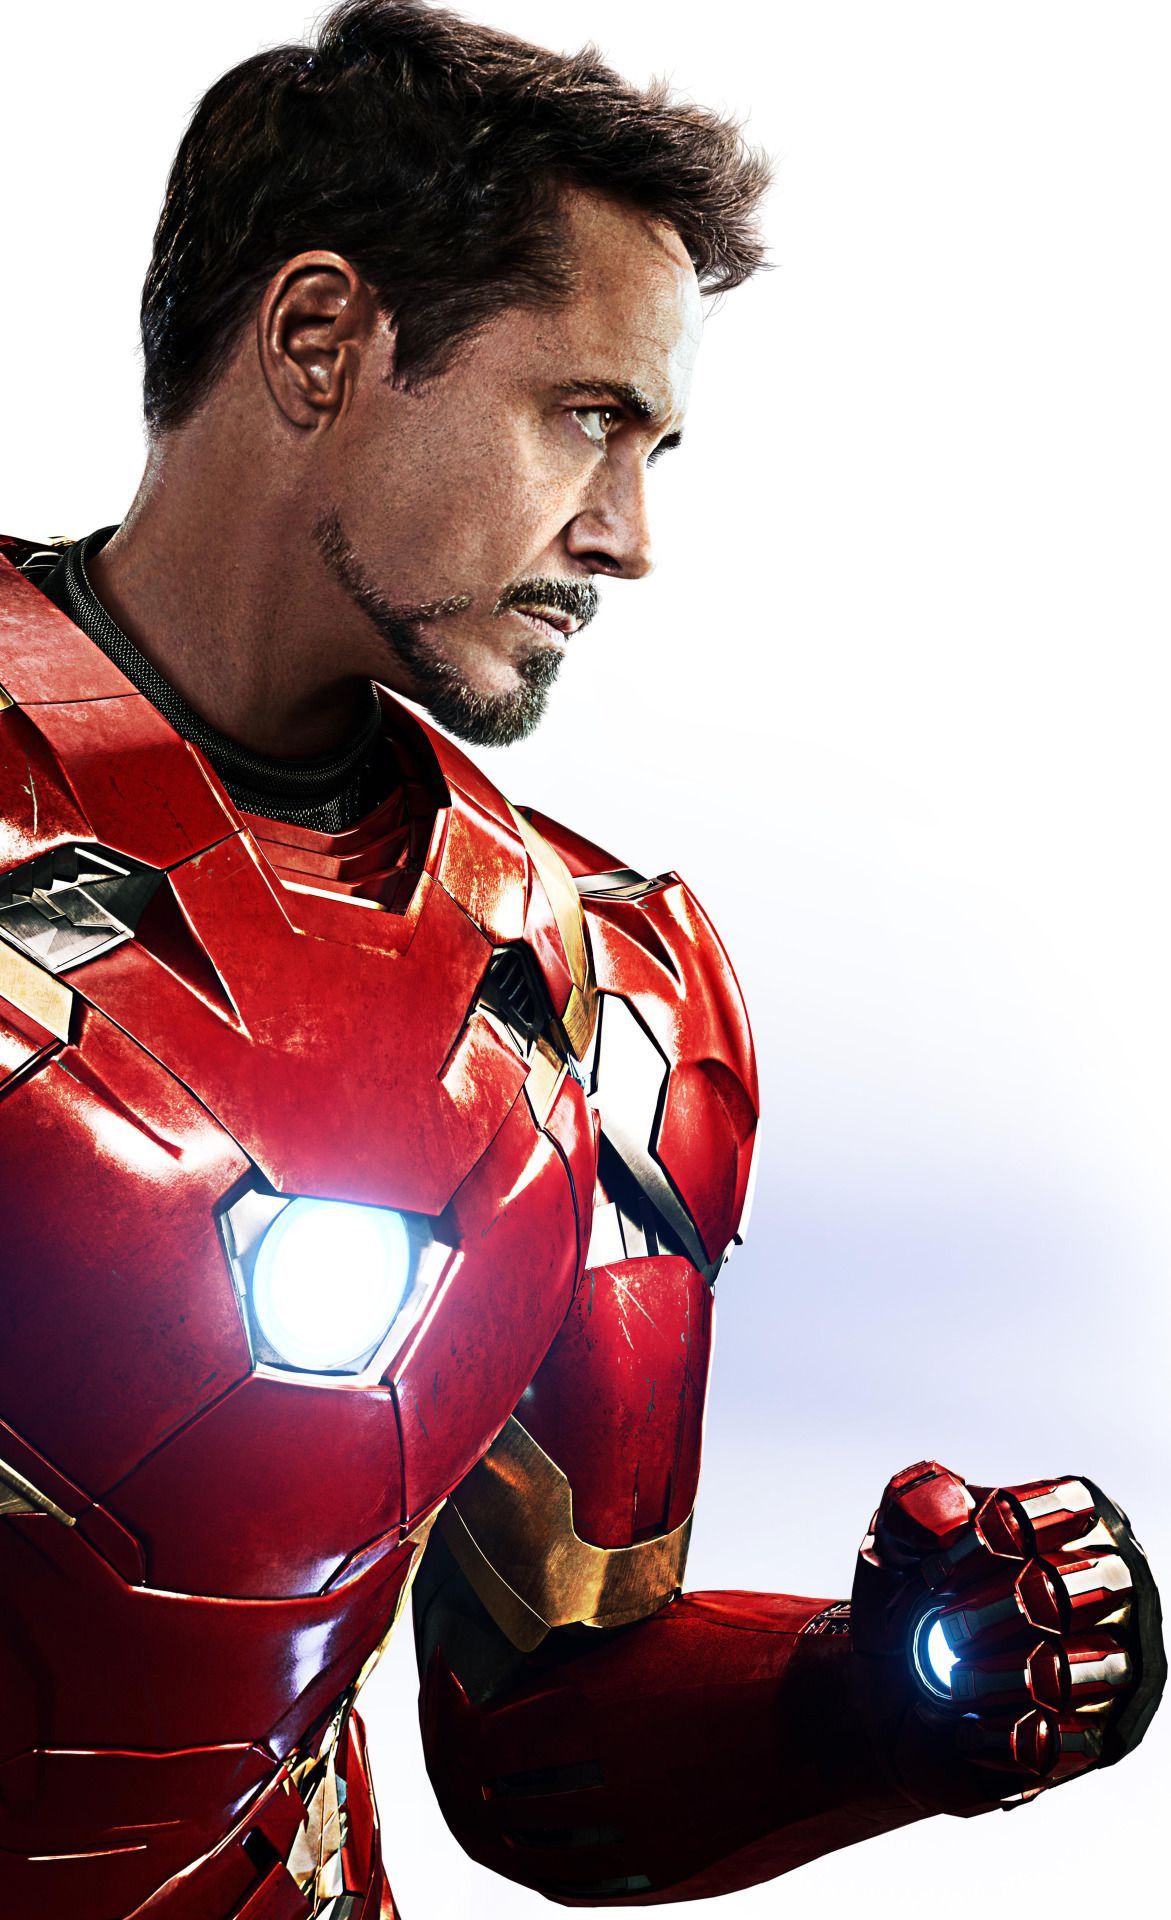 He and his people know he is integral to the franchise Robert Downey Jr  Reportedly Refused to Return as Iron Man After Marvel Rejected His 80M  Salary for Avengers Secret Wars Downplayed